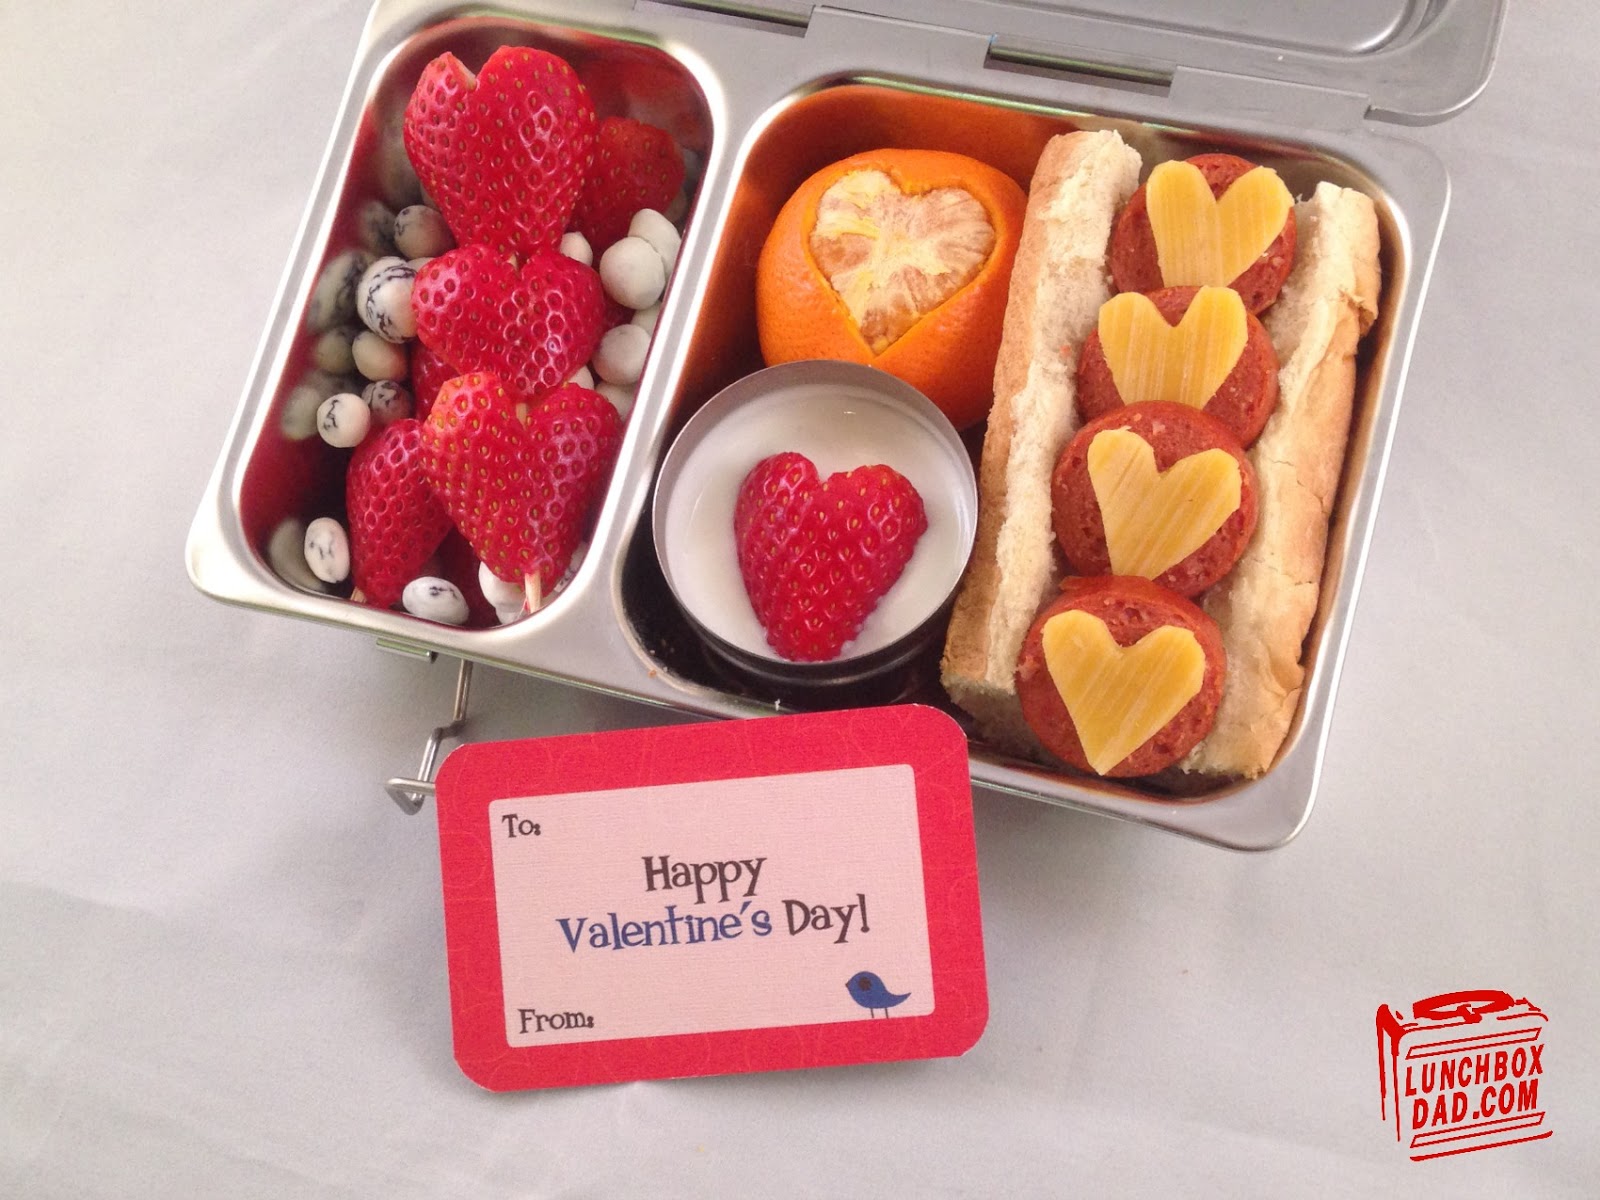 Lunchbox Dad Top 20 Valentine's Day Lunch and Snack Ideas